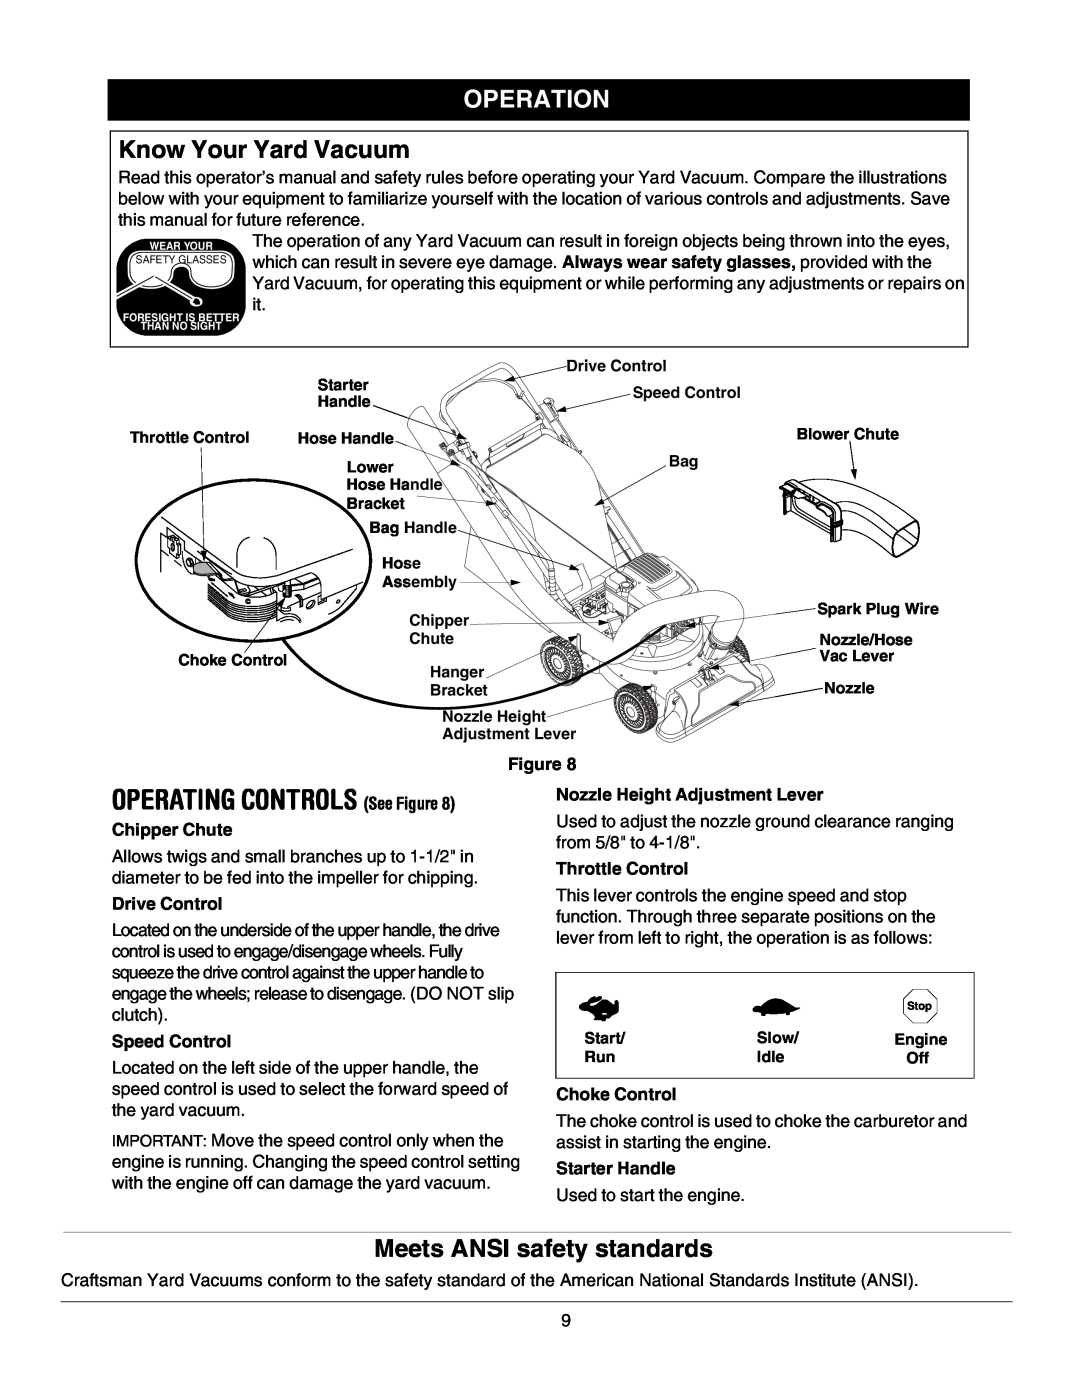 Craftsman 247.77099 OPERATING CONTROLS See Figure, Meets ANSI safety standards, Chipper Chute, Drive Control 